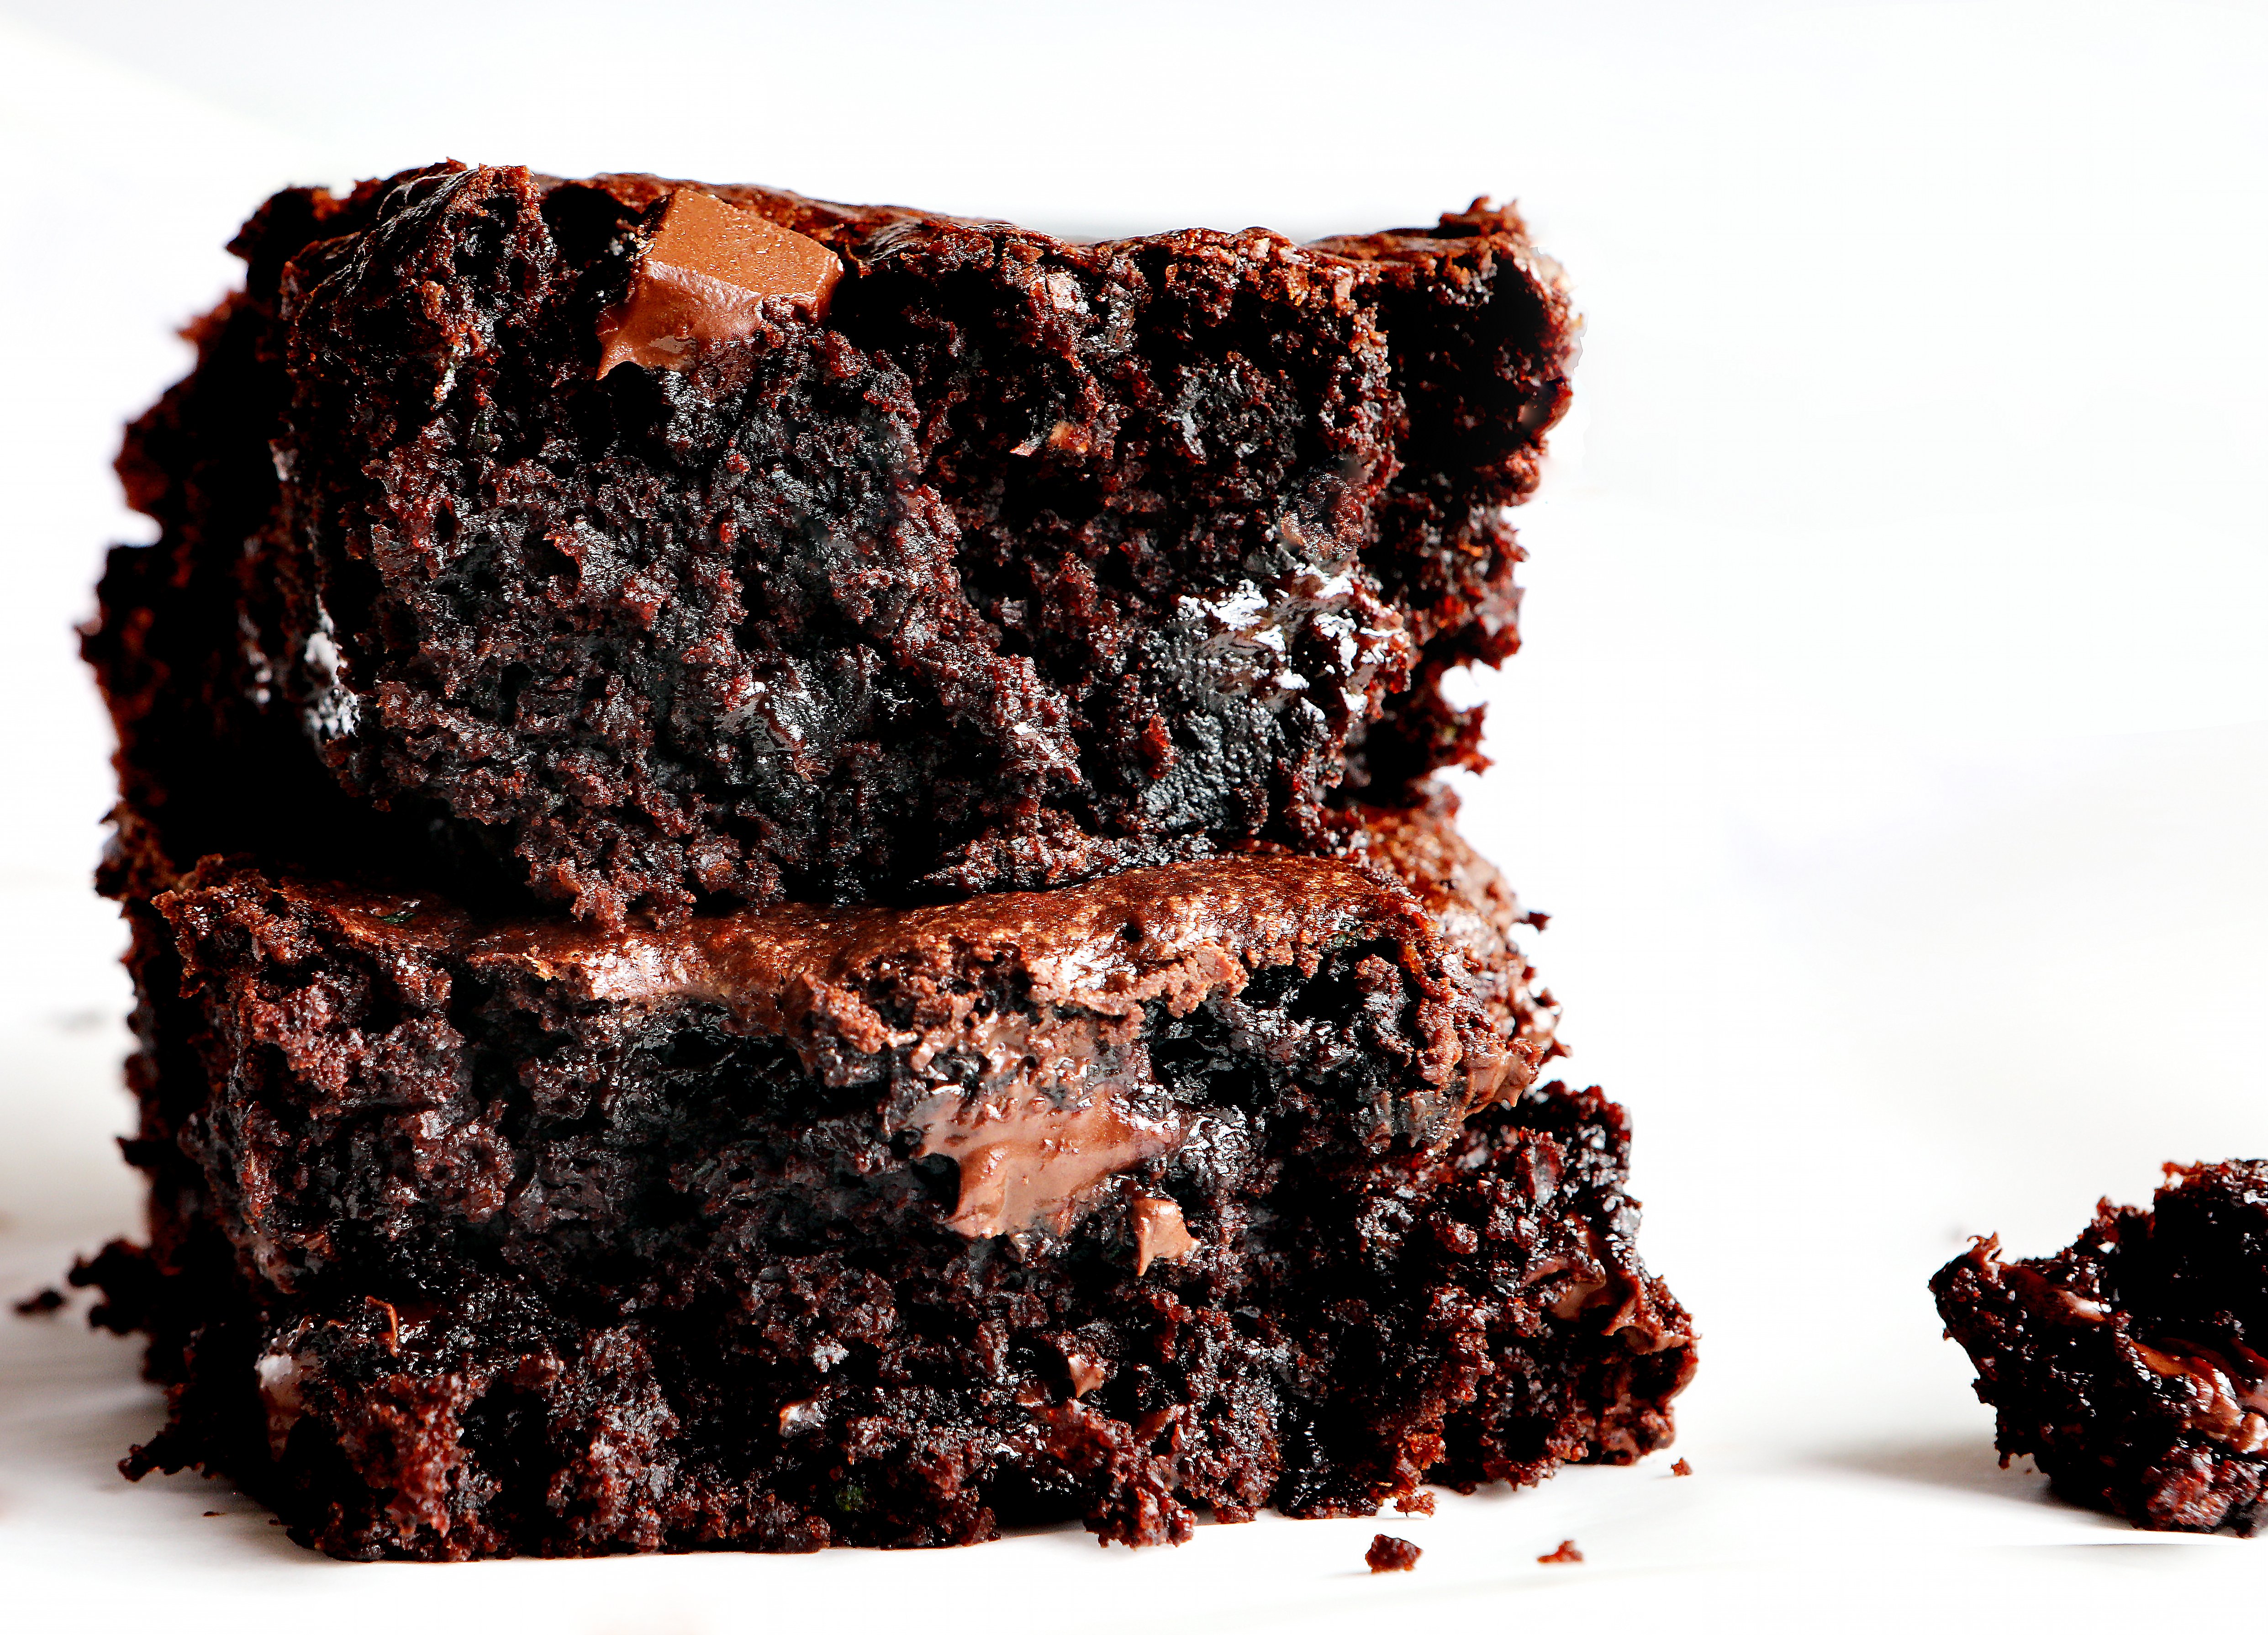 Stacked Zucchini Brownies Showing the Inside Creamy Texture